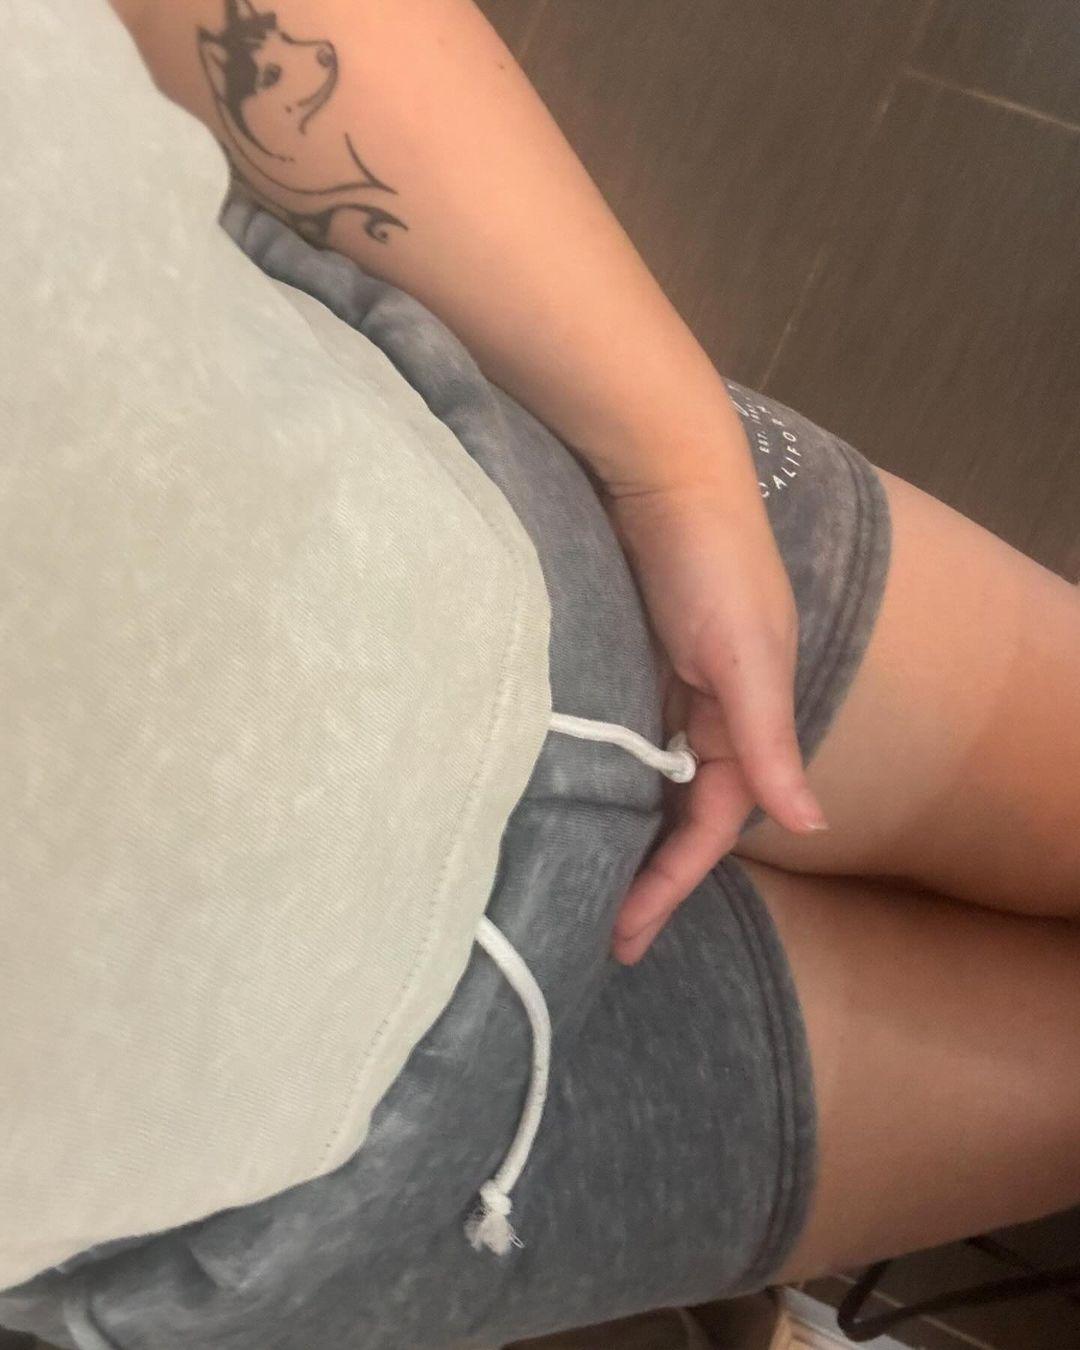 Gypsy Rose Blanchard holds her pregnant belly